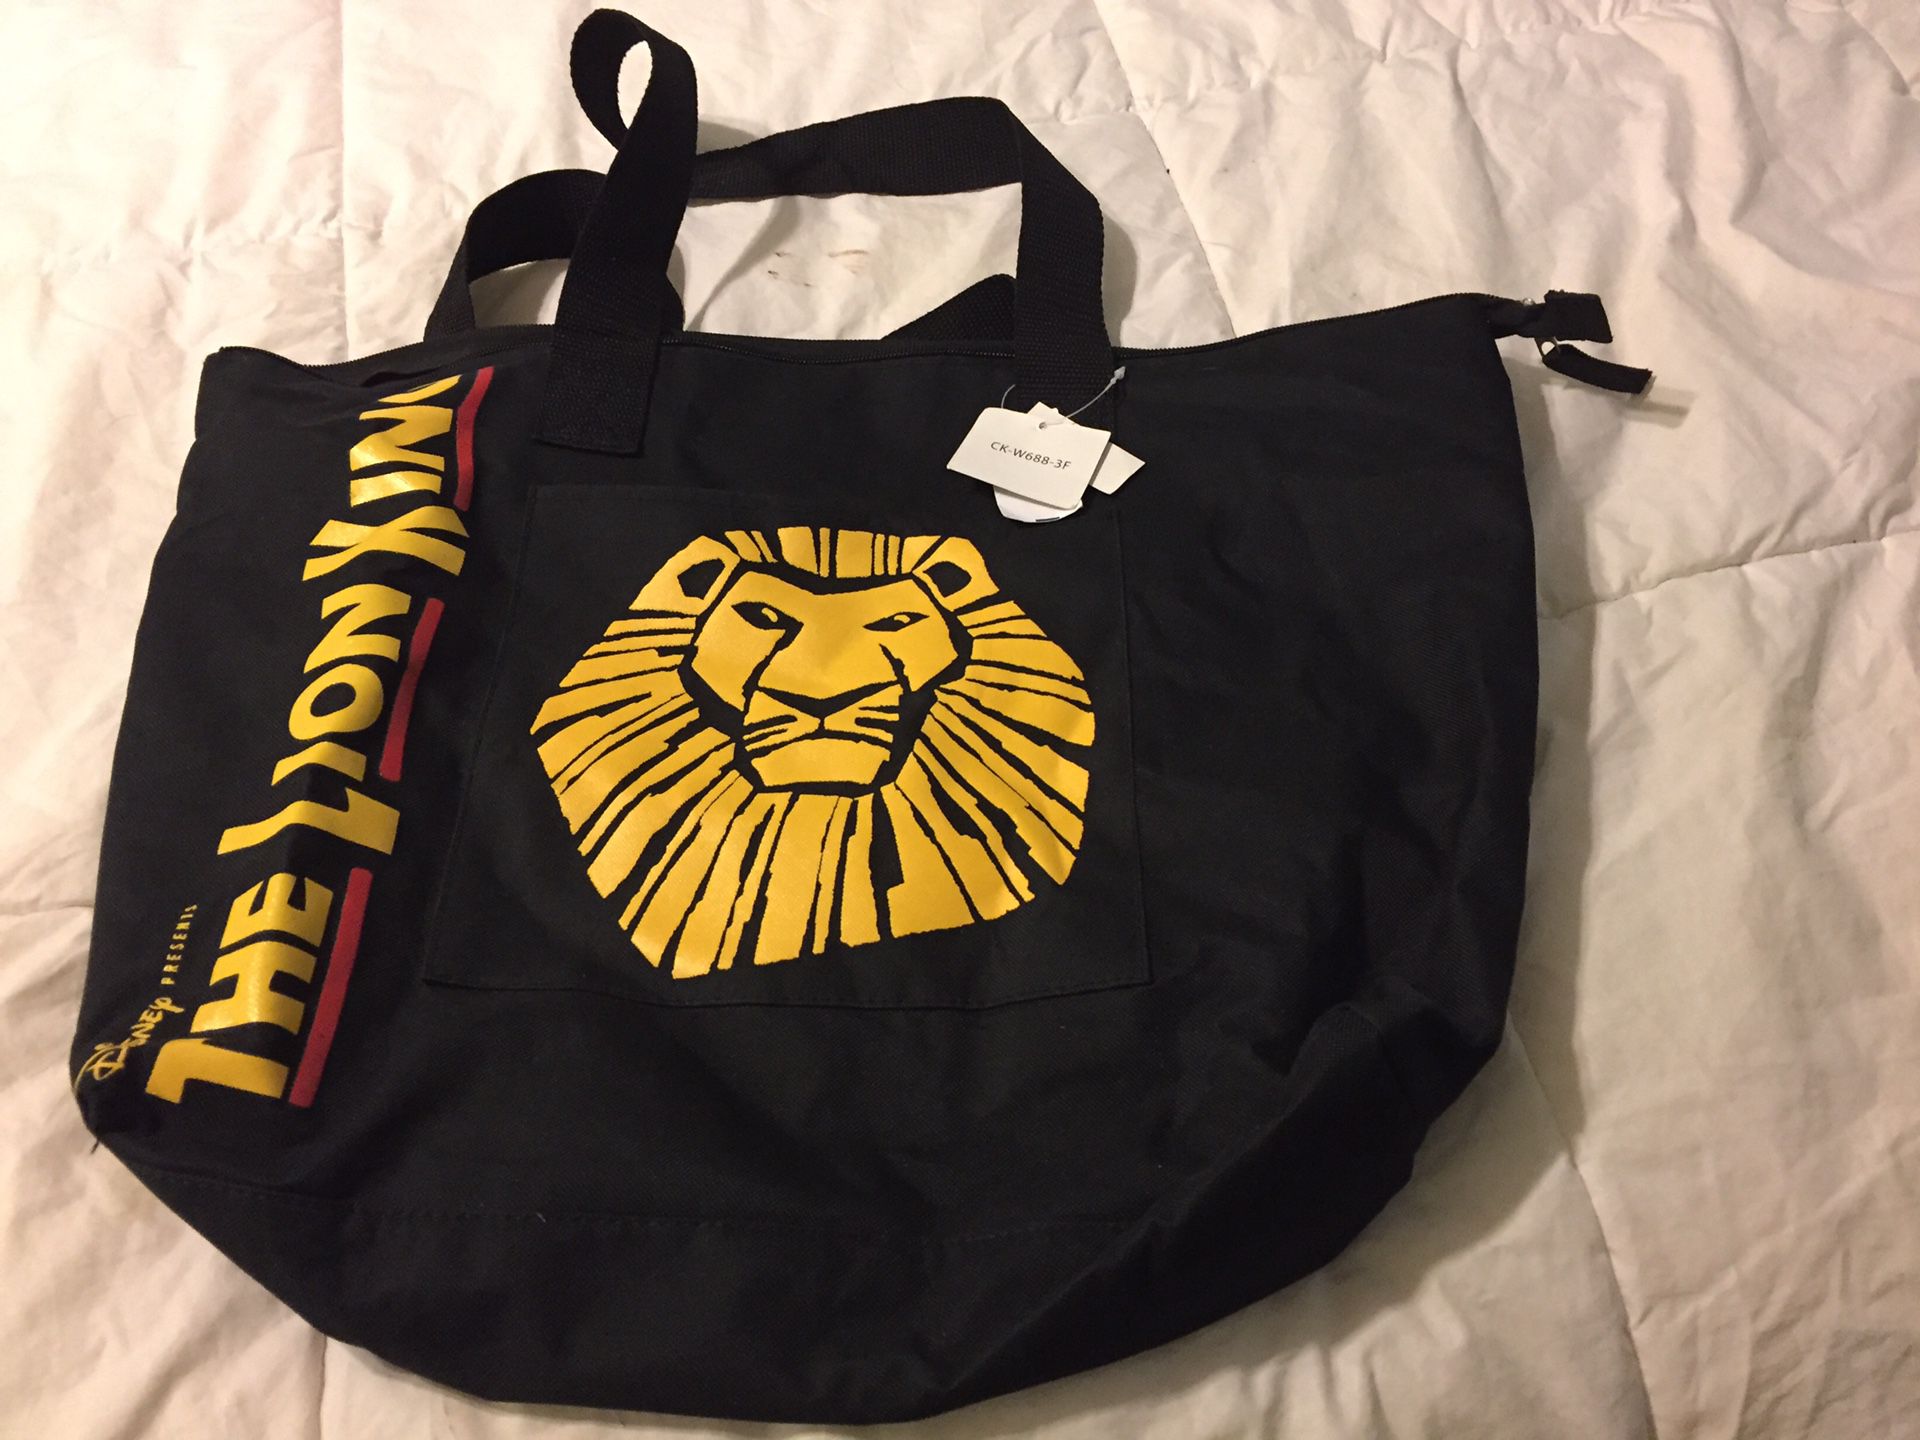 Lion King Zippered bag, new with tags